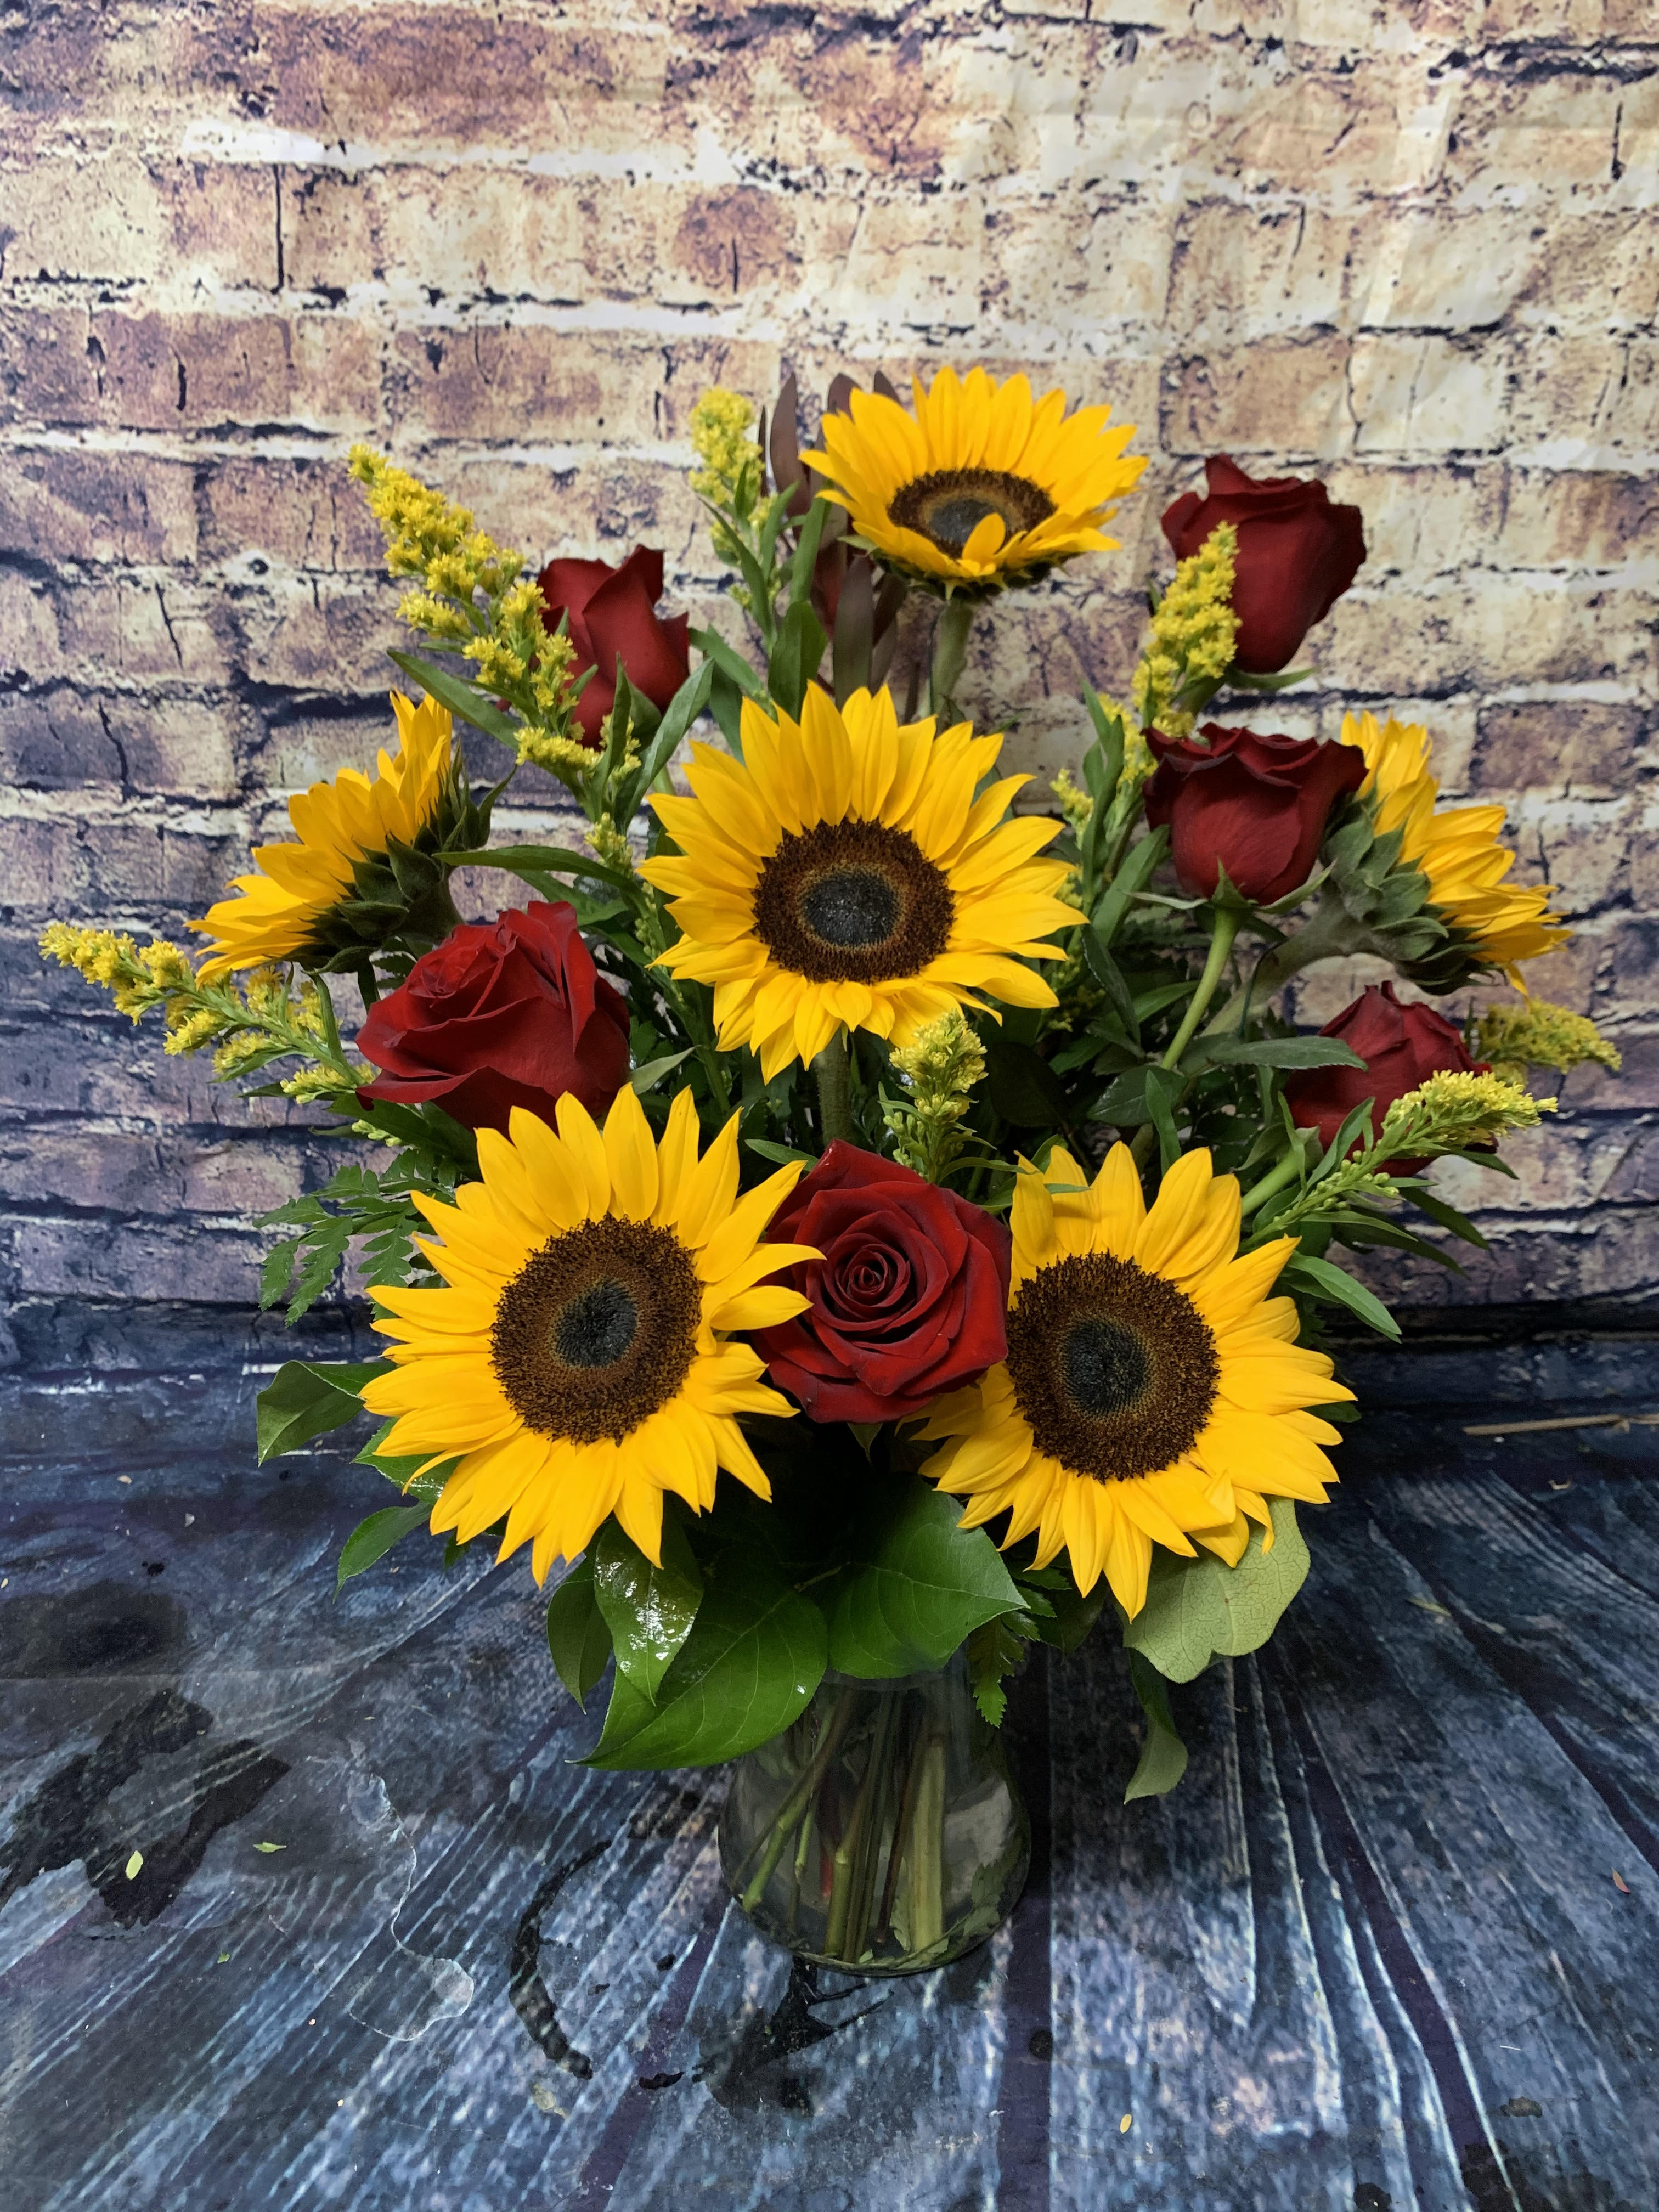 Lavish Sunflower and Rose Bouquet  - Who doesn't love Sunflowers and Red Roses???  A lovely combination any time of the year and any occasion!